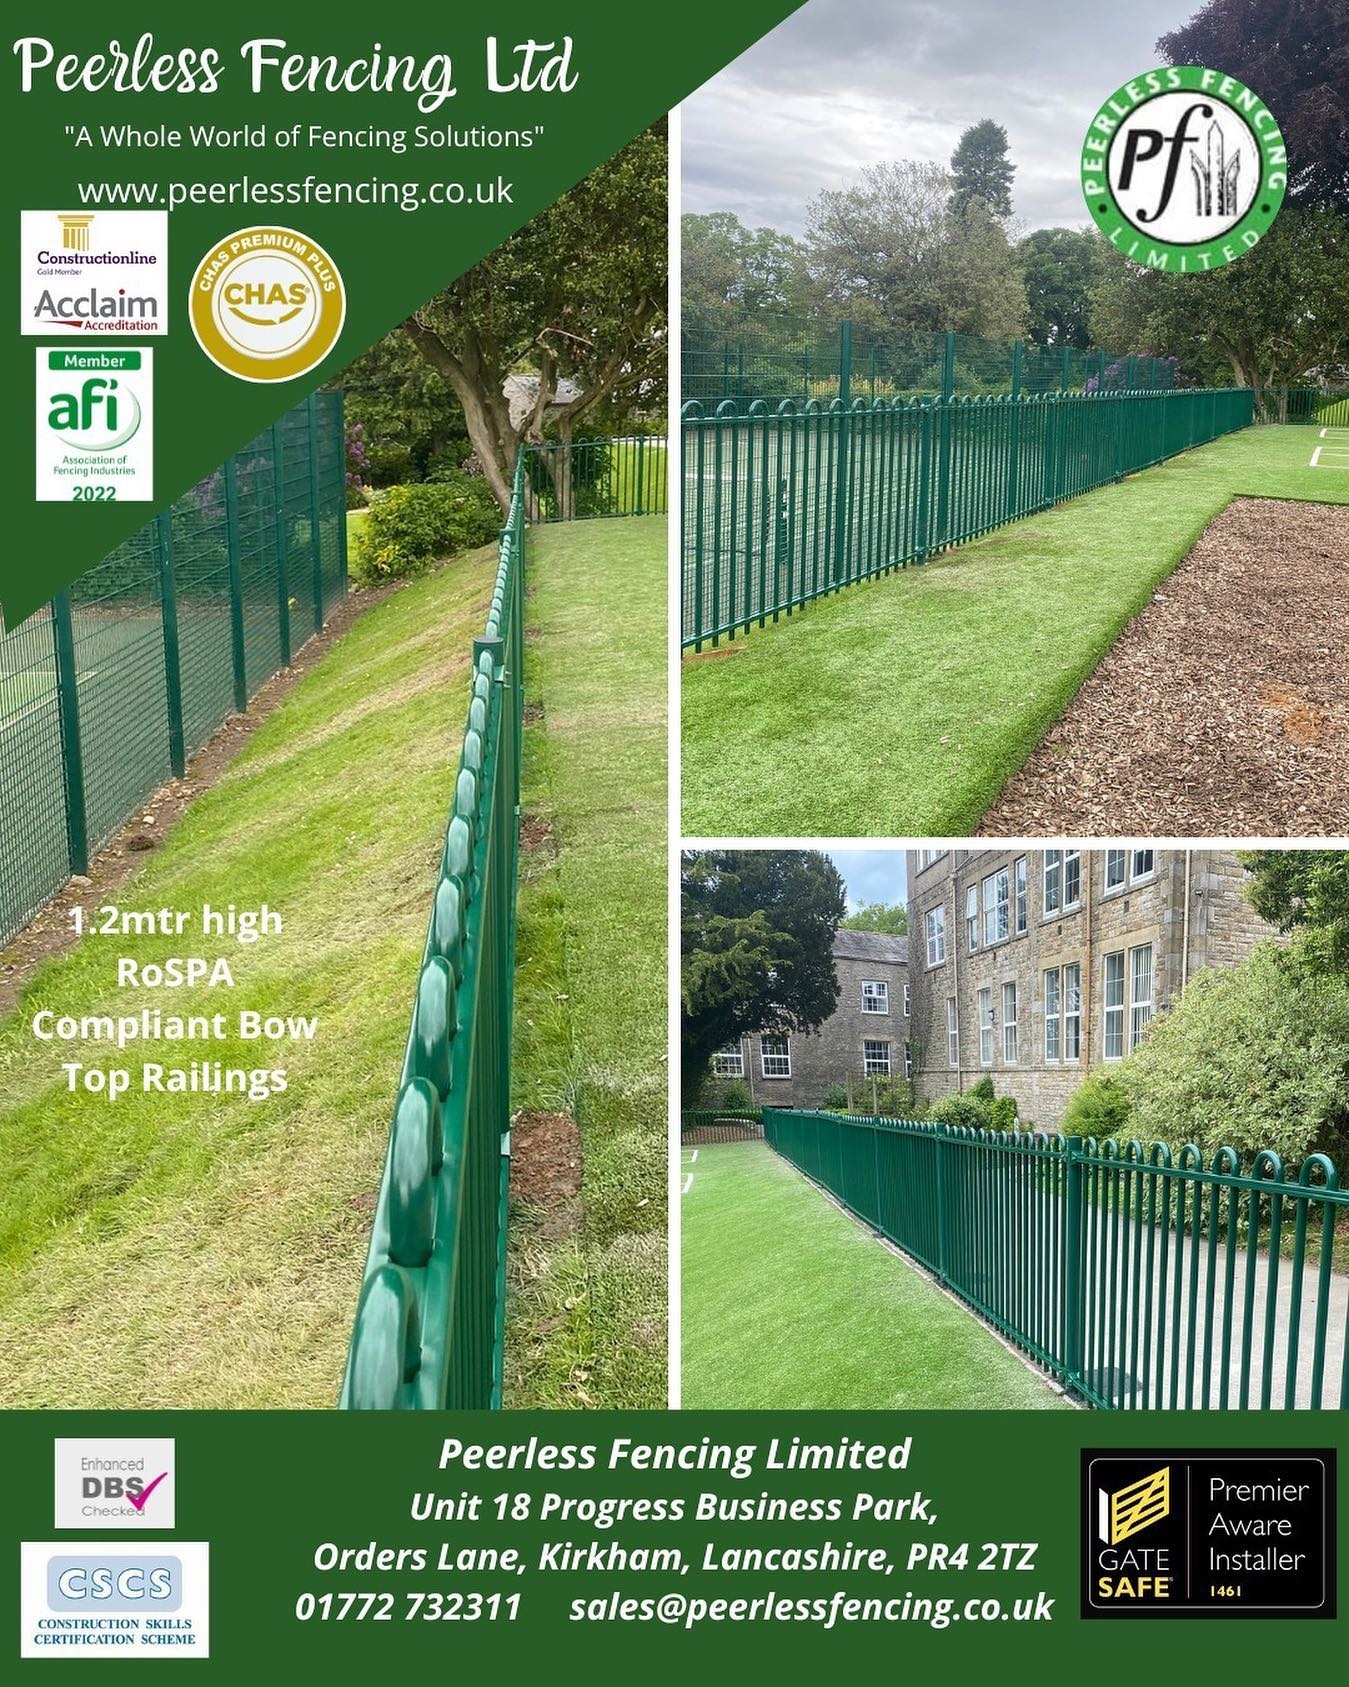 These ROSPA compliant Bow Top Railings look absolutely superb at this school. Great installation by the team! Contact 01772732311 for details on this product and many others #bowtoprailings #rospa #schoolfencing #safeguardingchildren #playgroundfencing #awholeworldoffencingsolutions